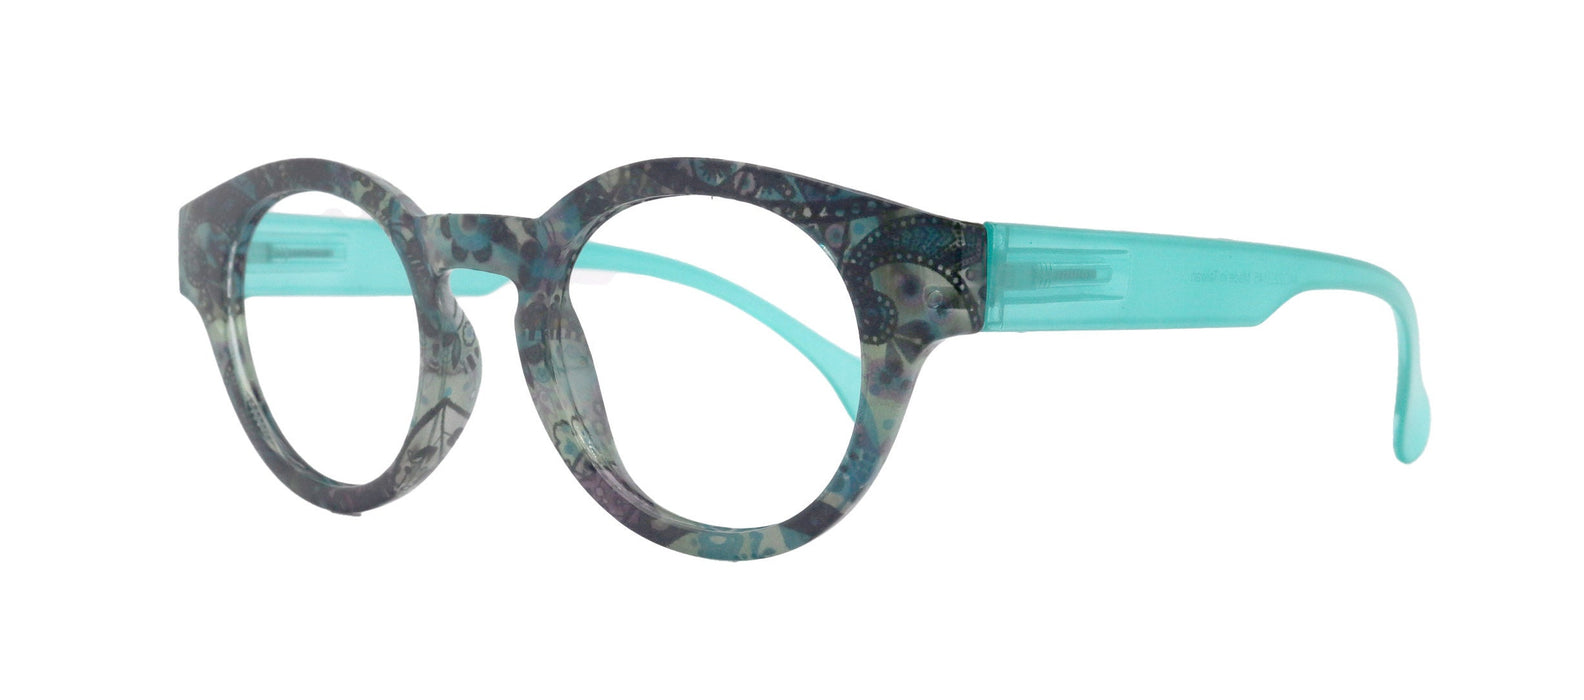 Premium Reading Glasses High End Readers +1.25 .. +3.00 +4.00 (Turquoise) Round Optical Frames. NY Fifth Avenue.